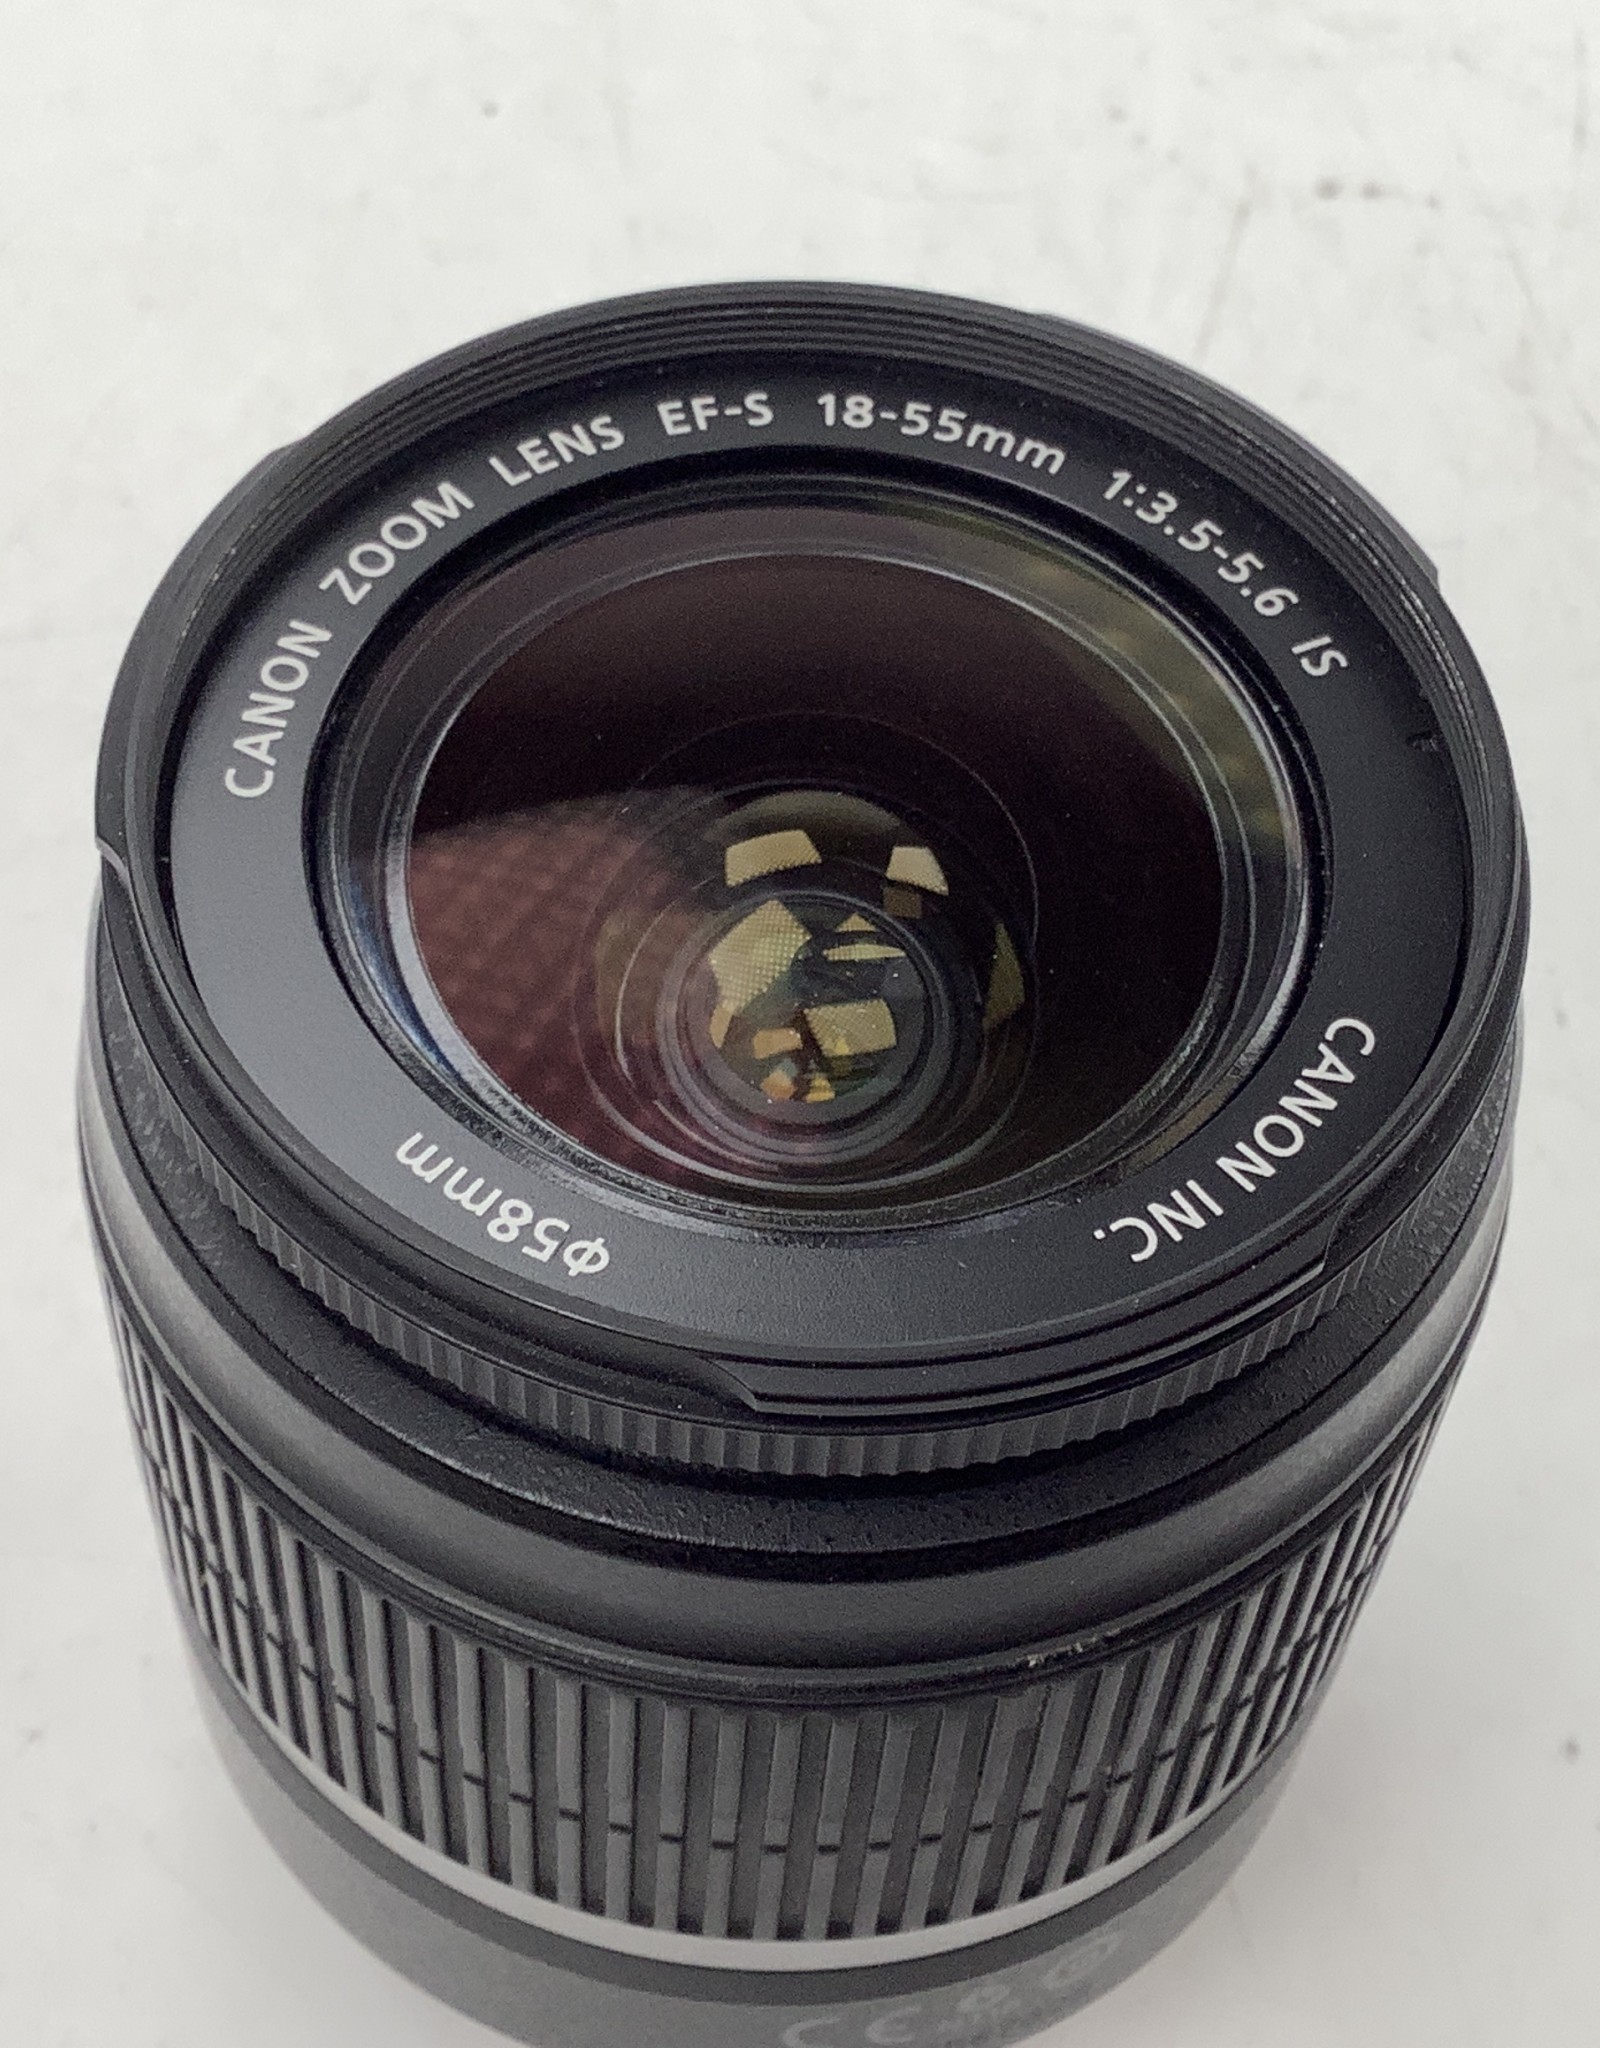 CANON Canon EF-S 18-55mm f3.5-5.6 IS Lens Used Good